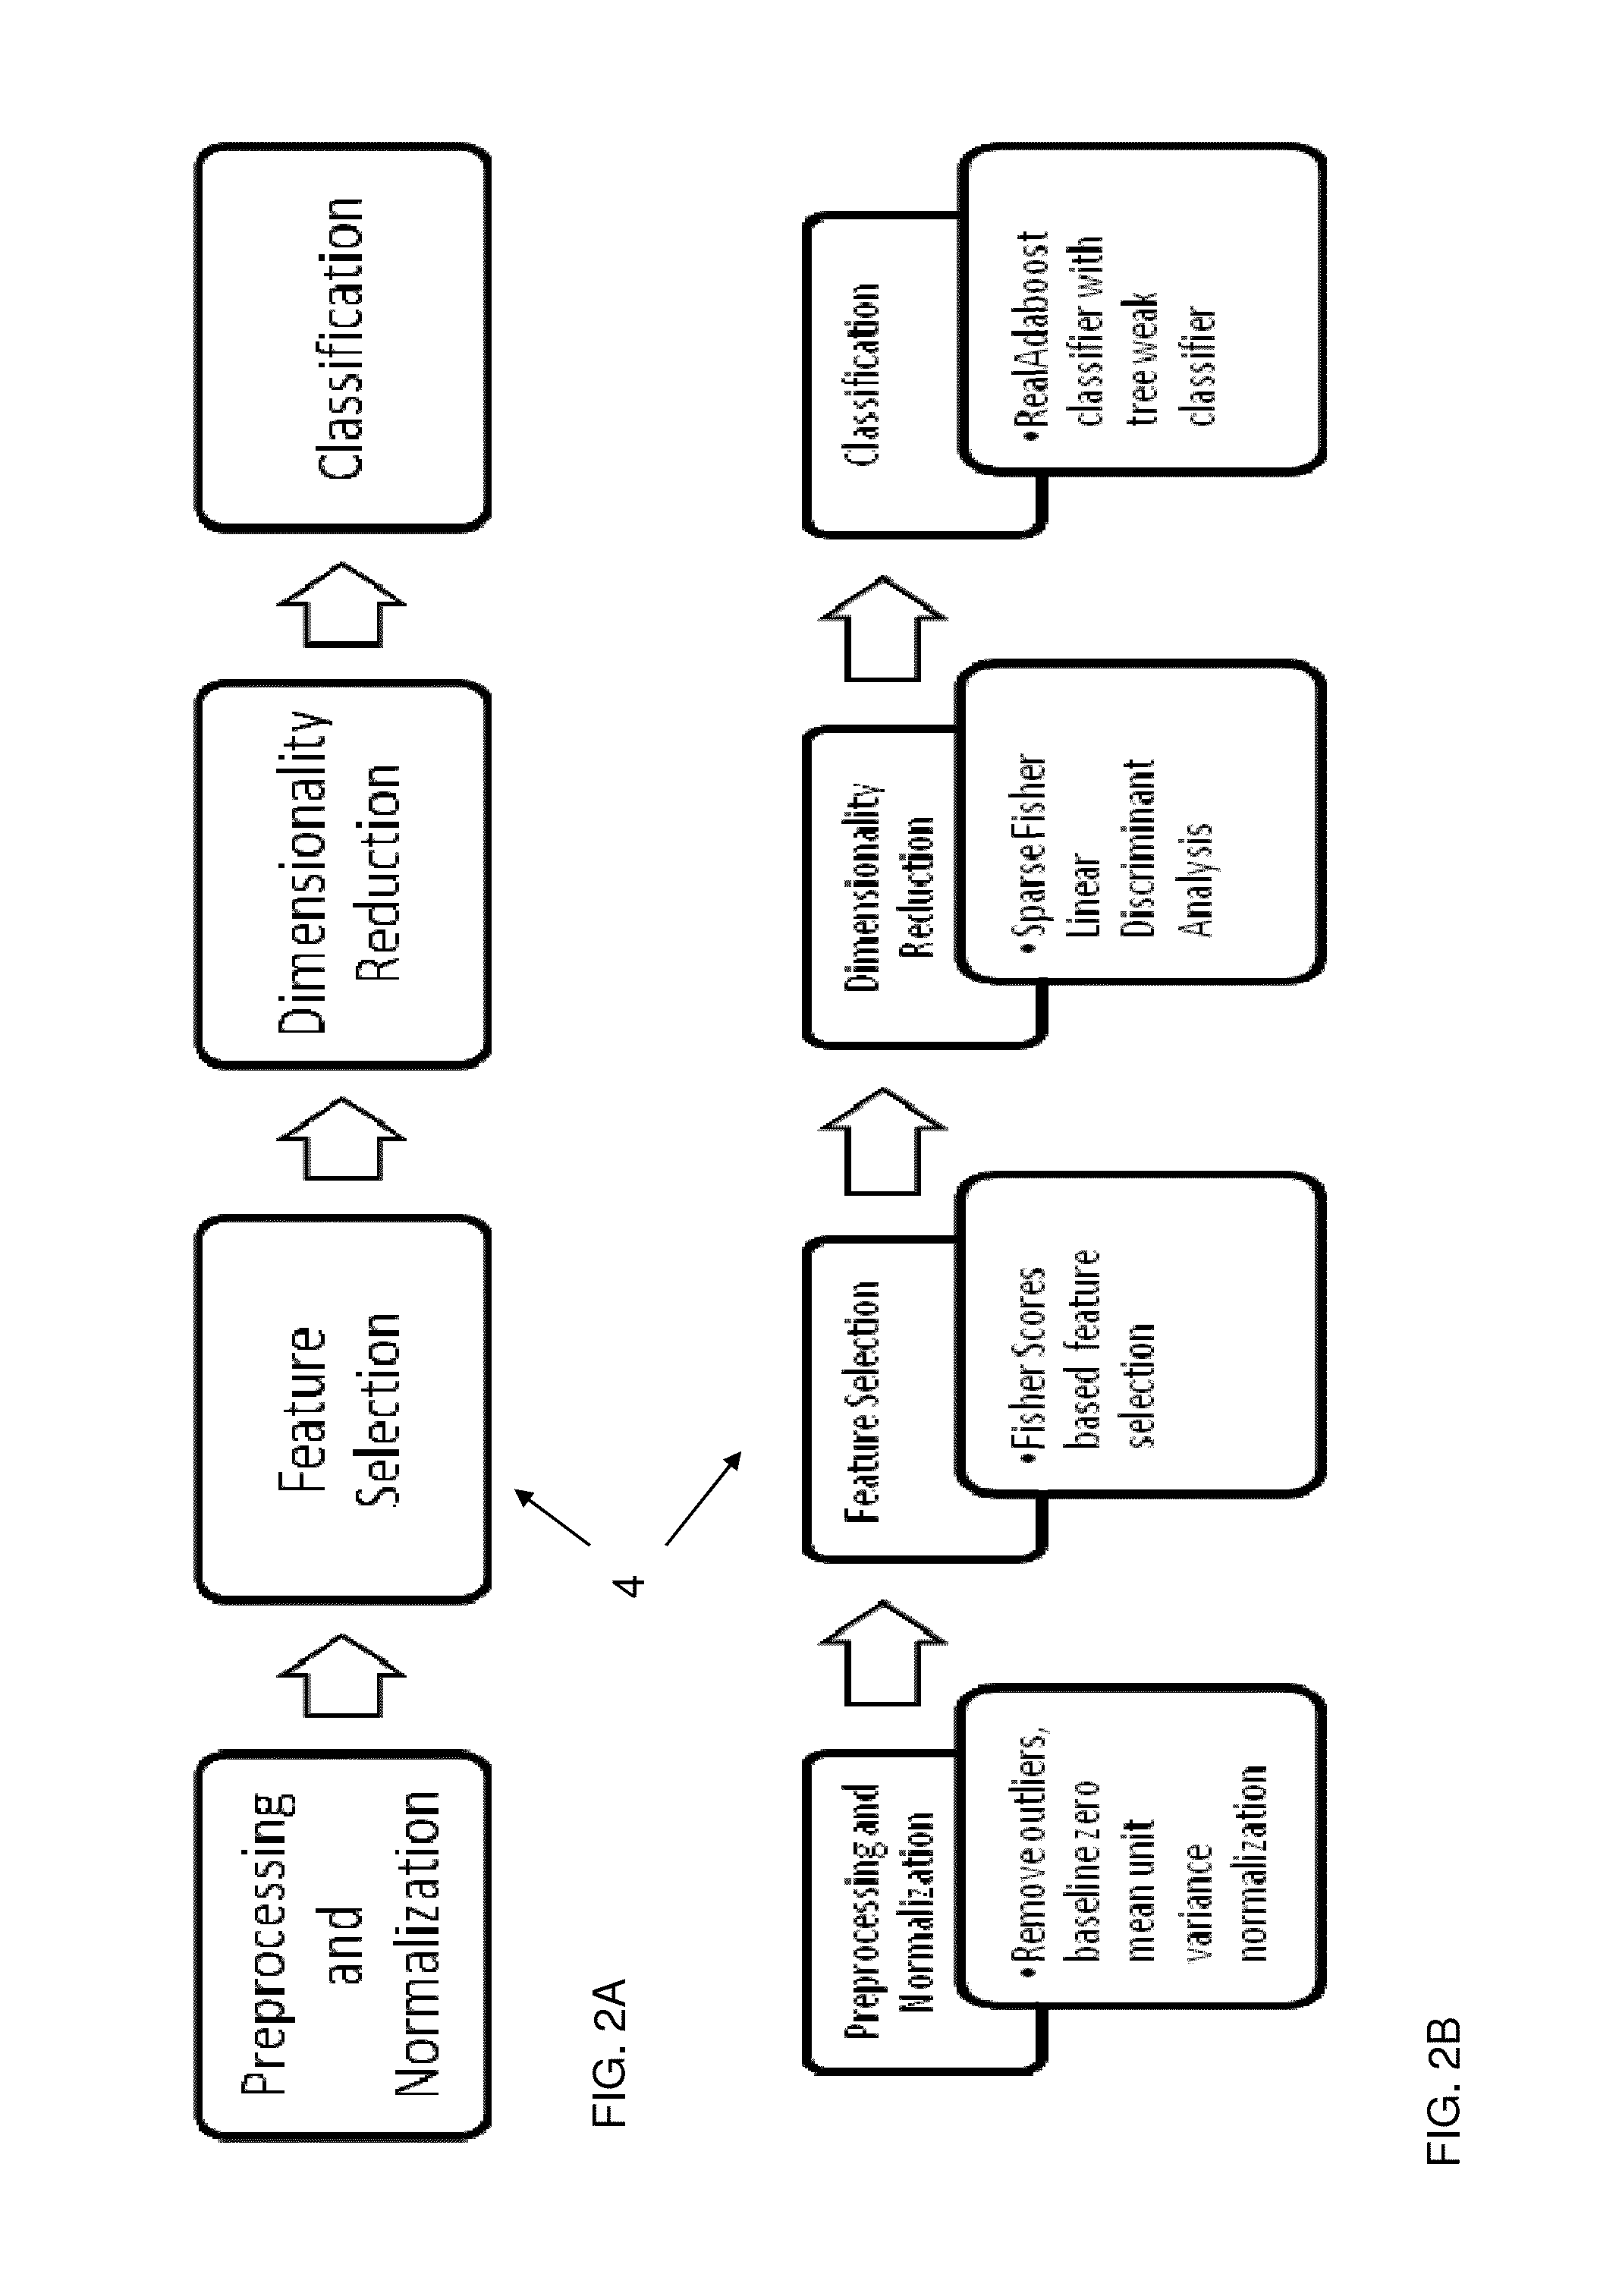 System and method for pain monitoring using a multidimensional analysis of physiological signals